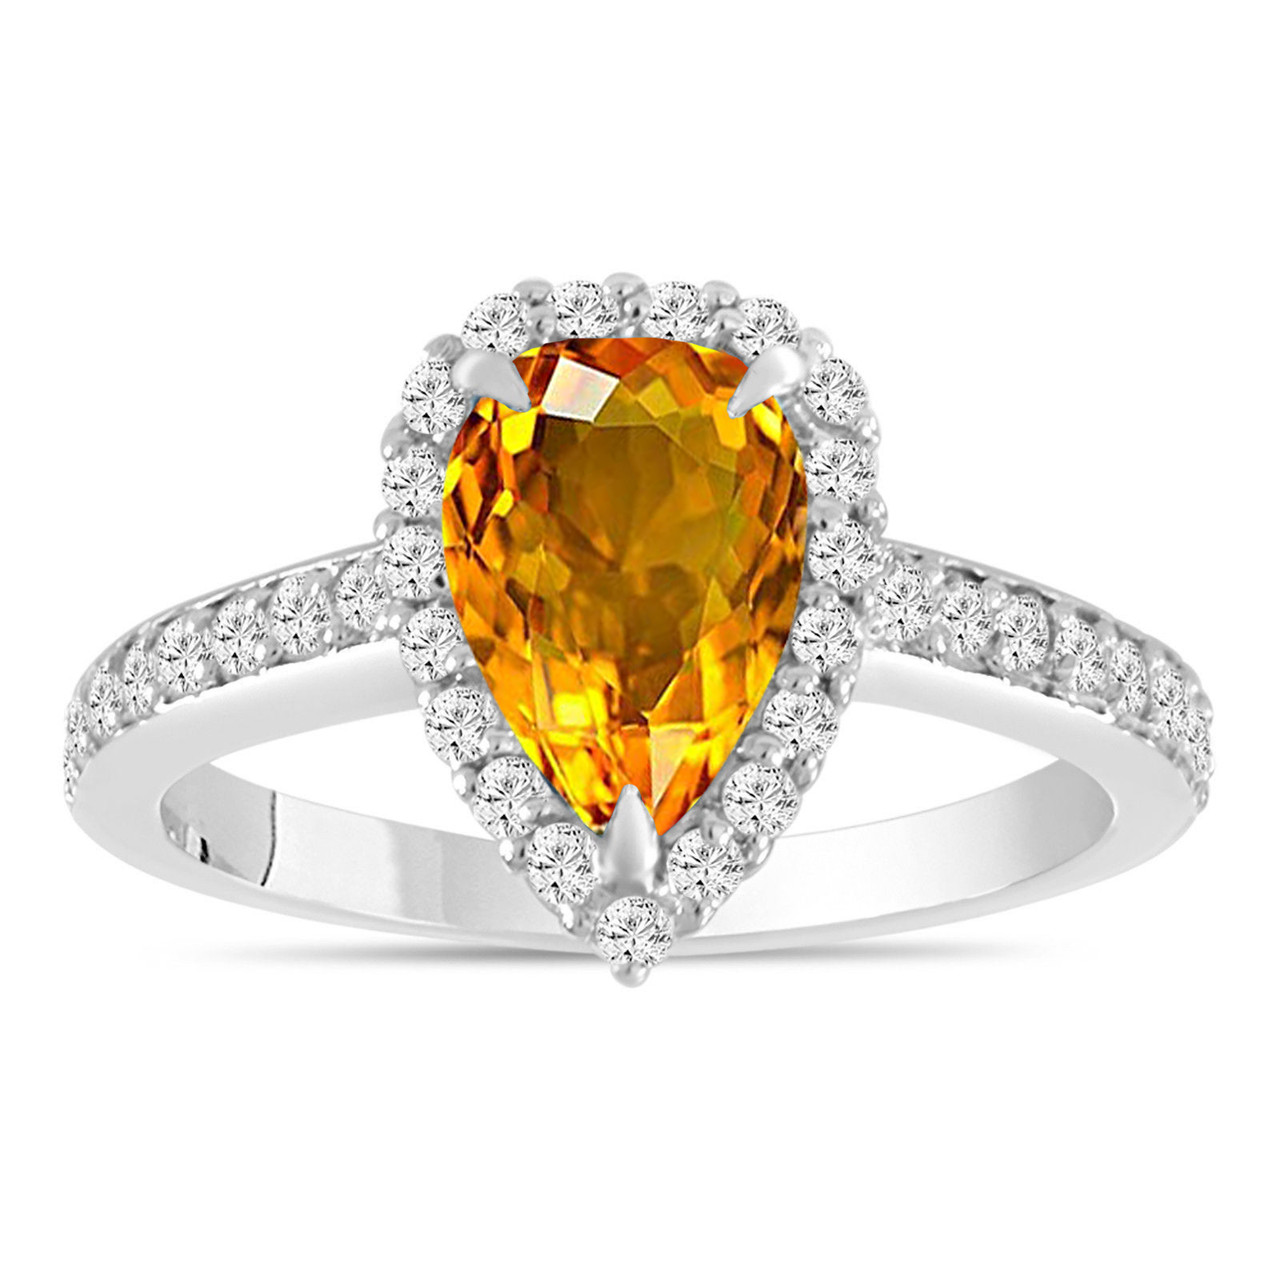 5ct Oval Citrine Diamond Accents Engagement Ring 14K White Gold